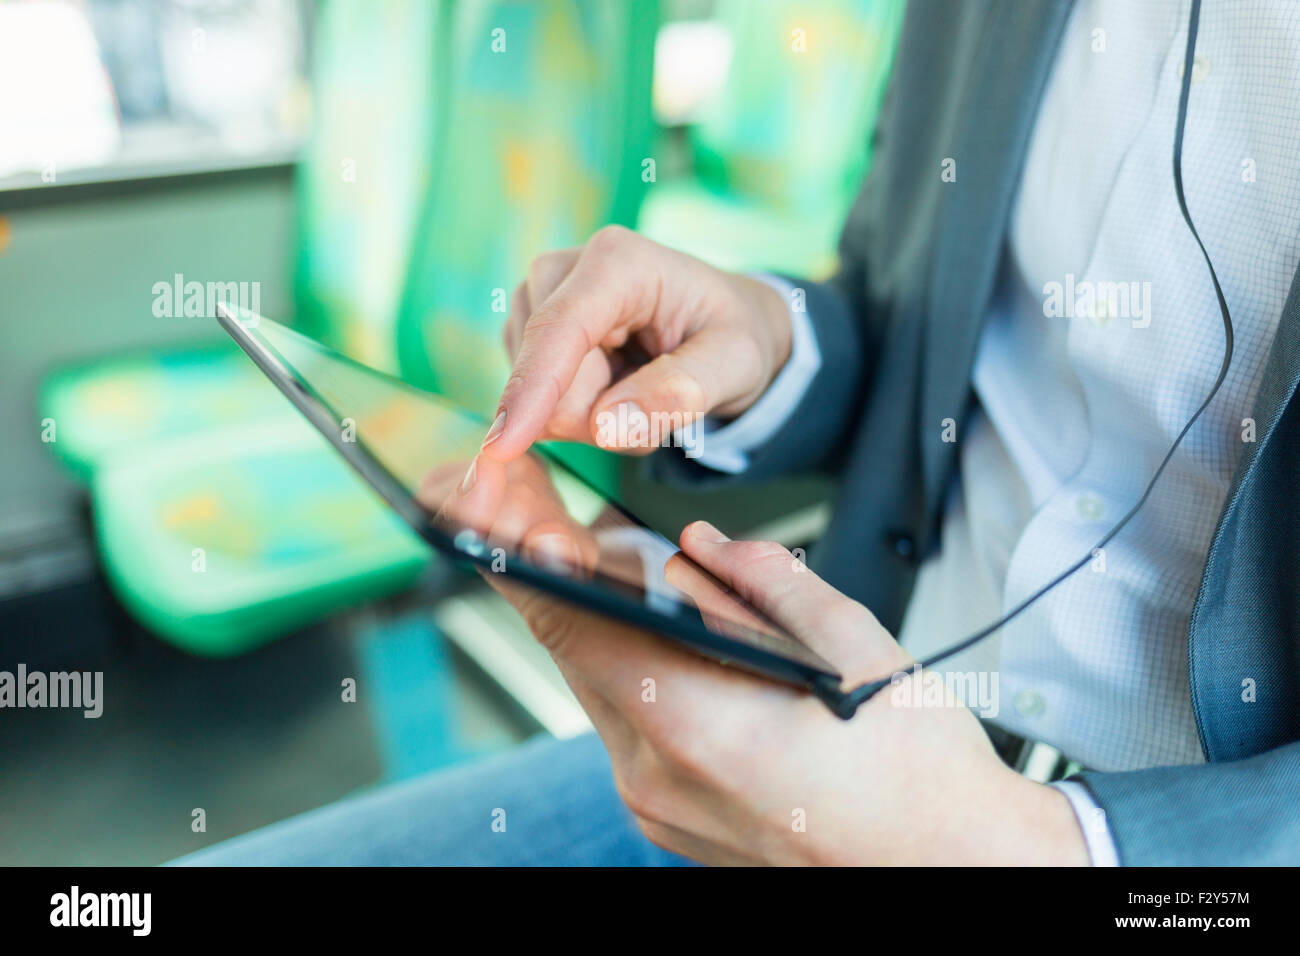 Man listening music with tablet pc. on bus. texting message. Close-up hands Stock Photo